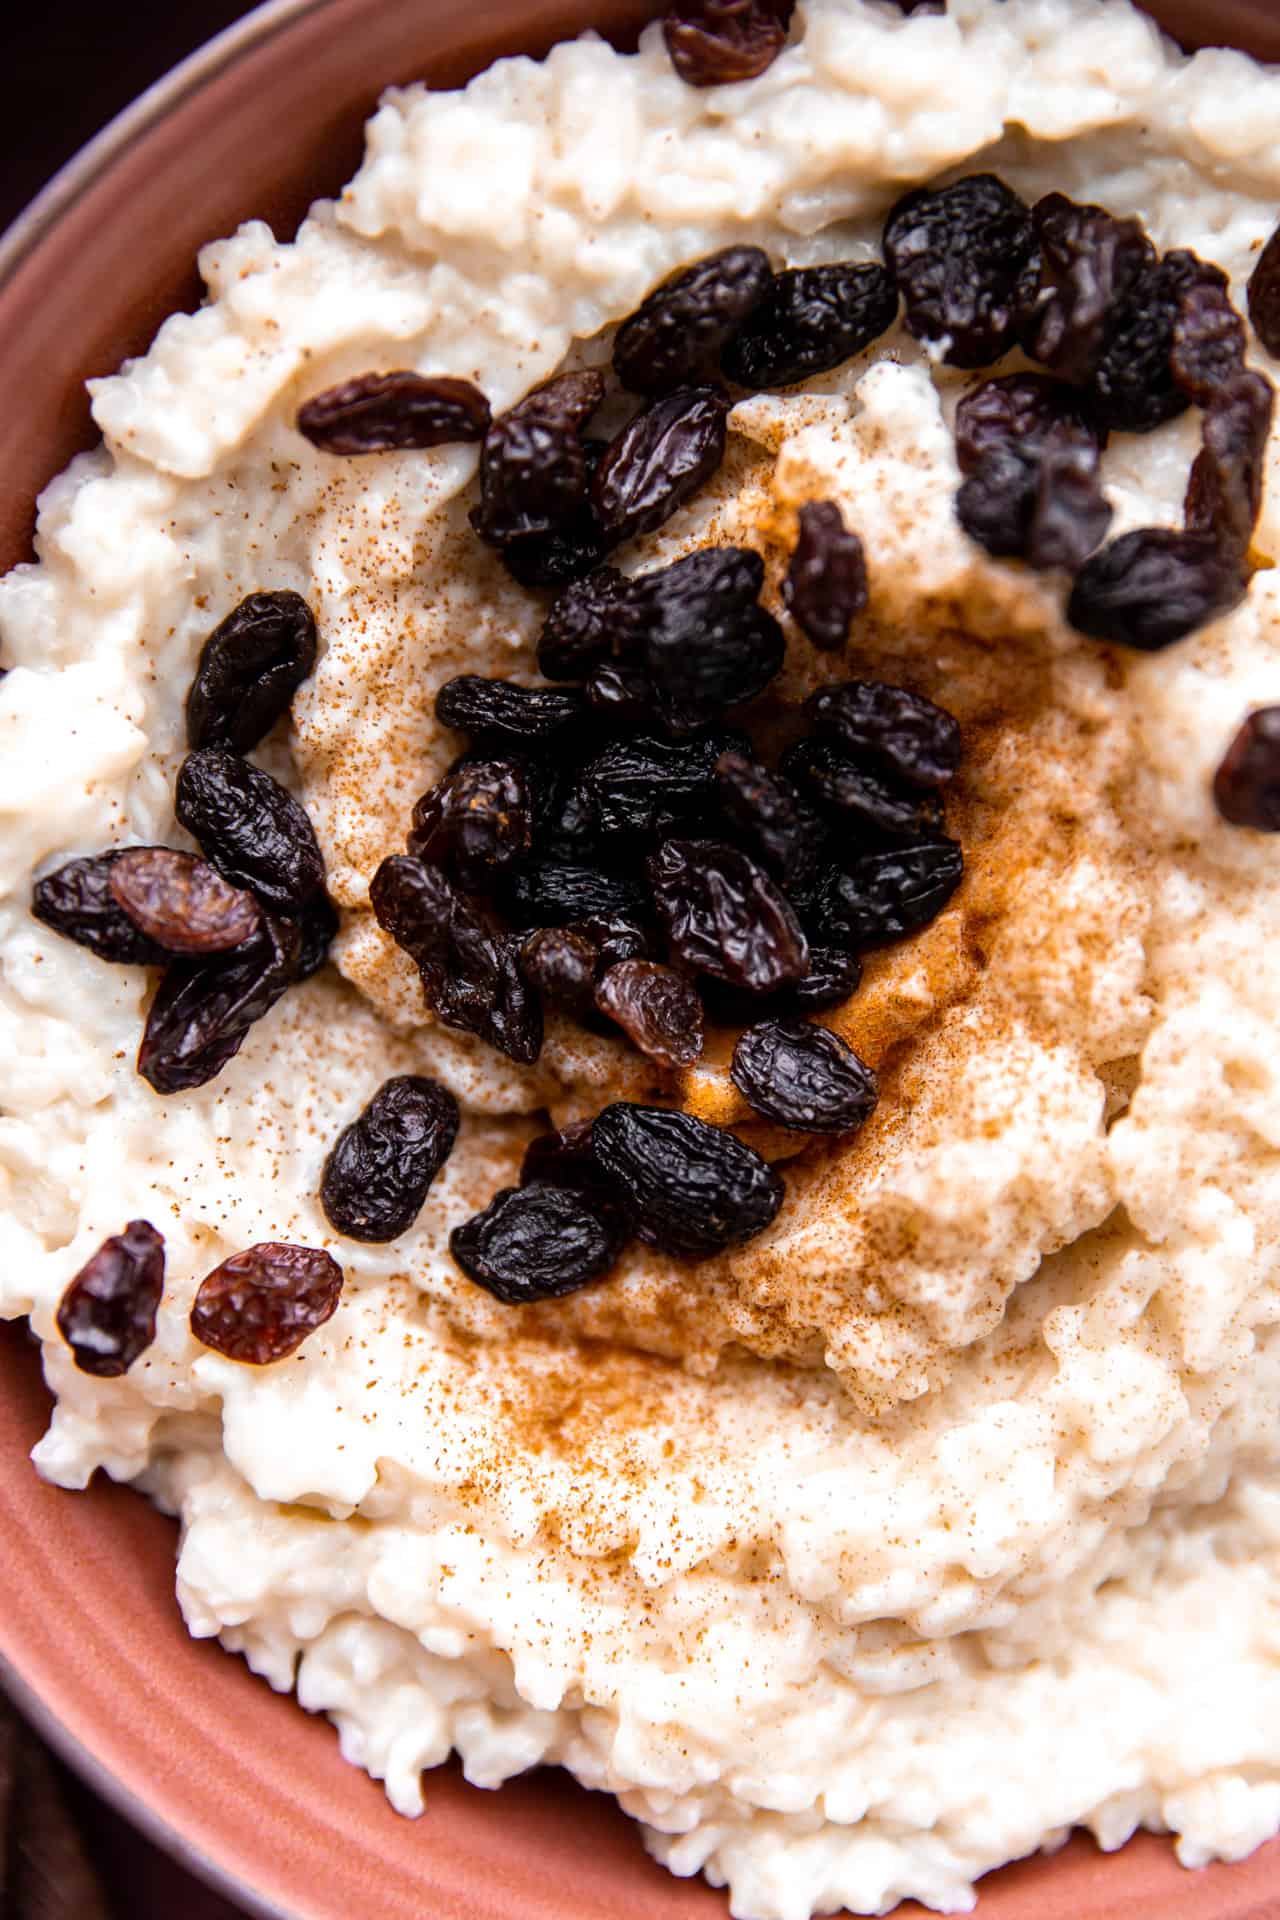 Up close view of raisins on top of arroz con leche.